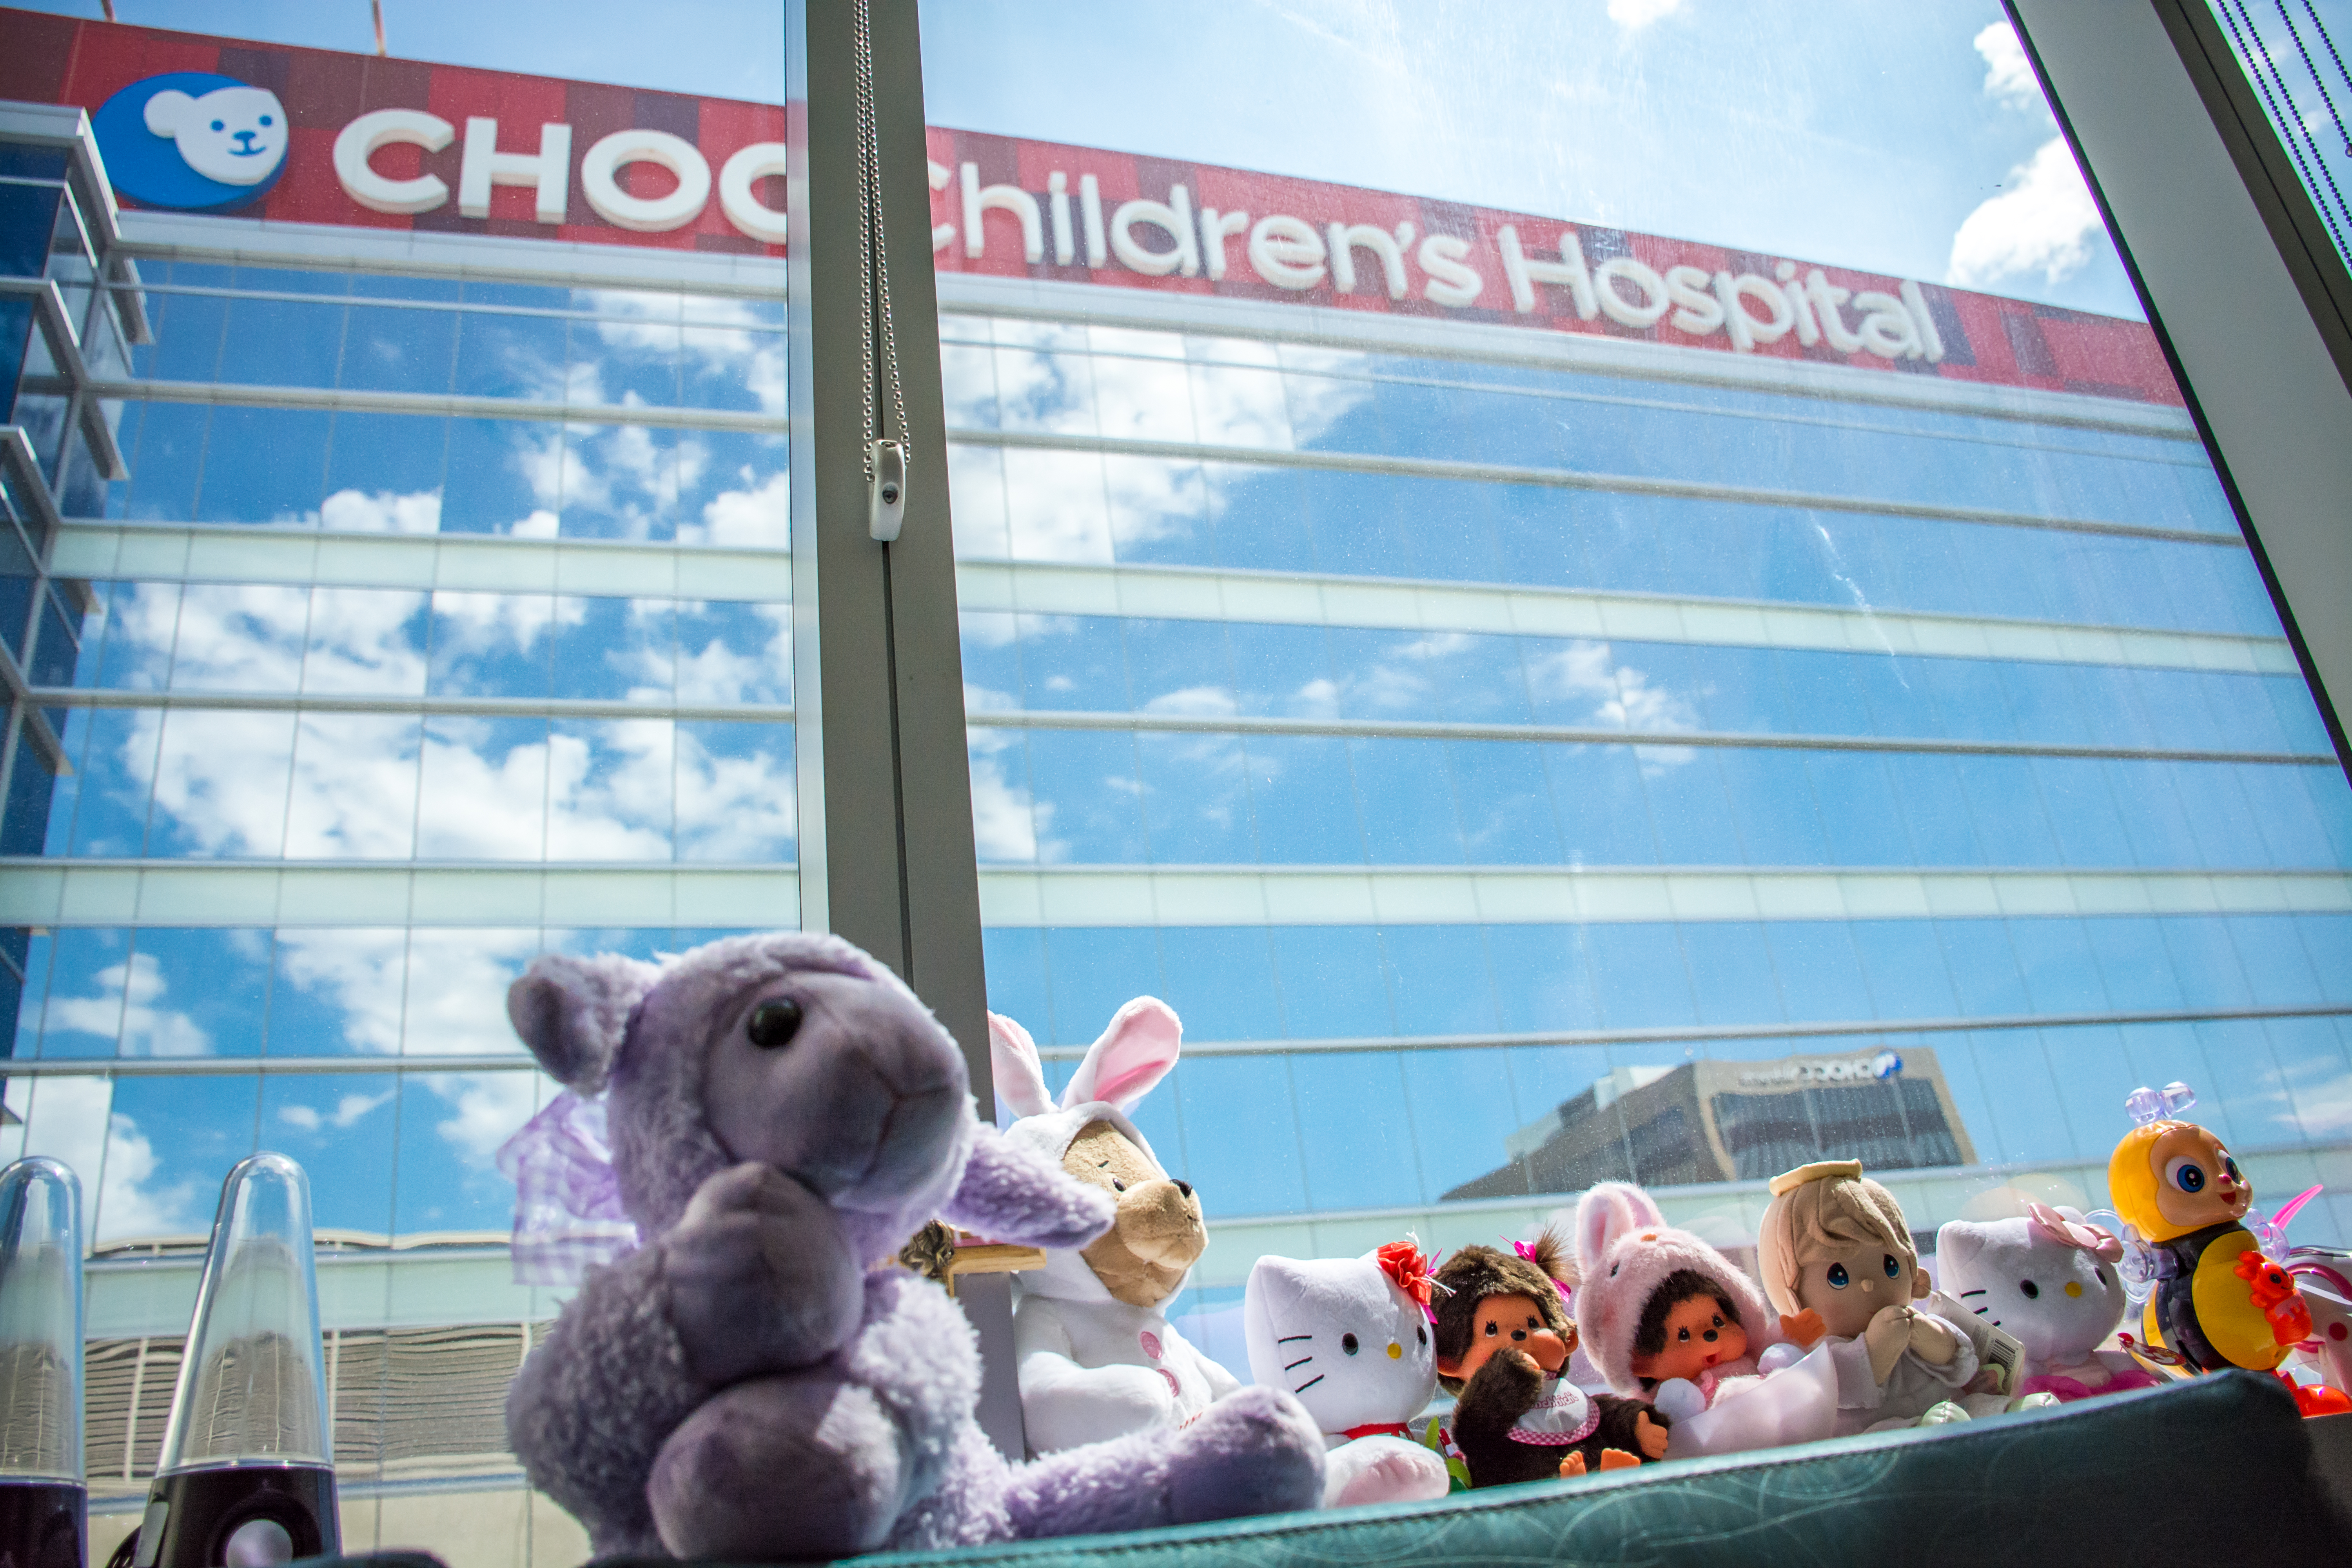 Darlyn's parents have decorate her private room in the CHOC Children's NICU to feel more like home.